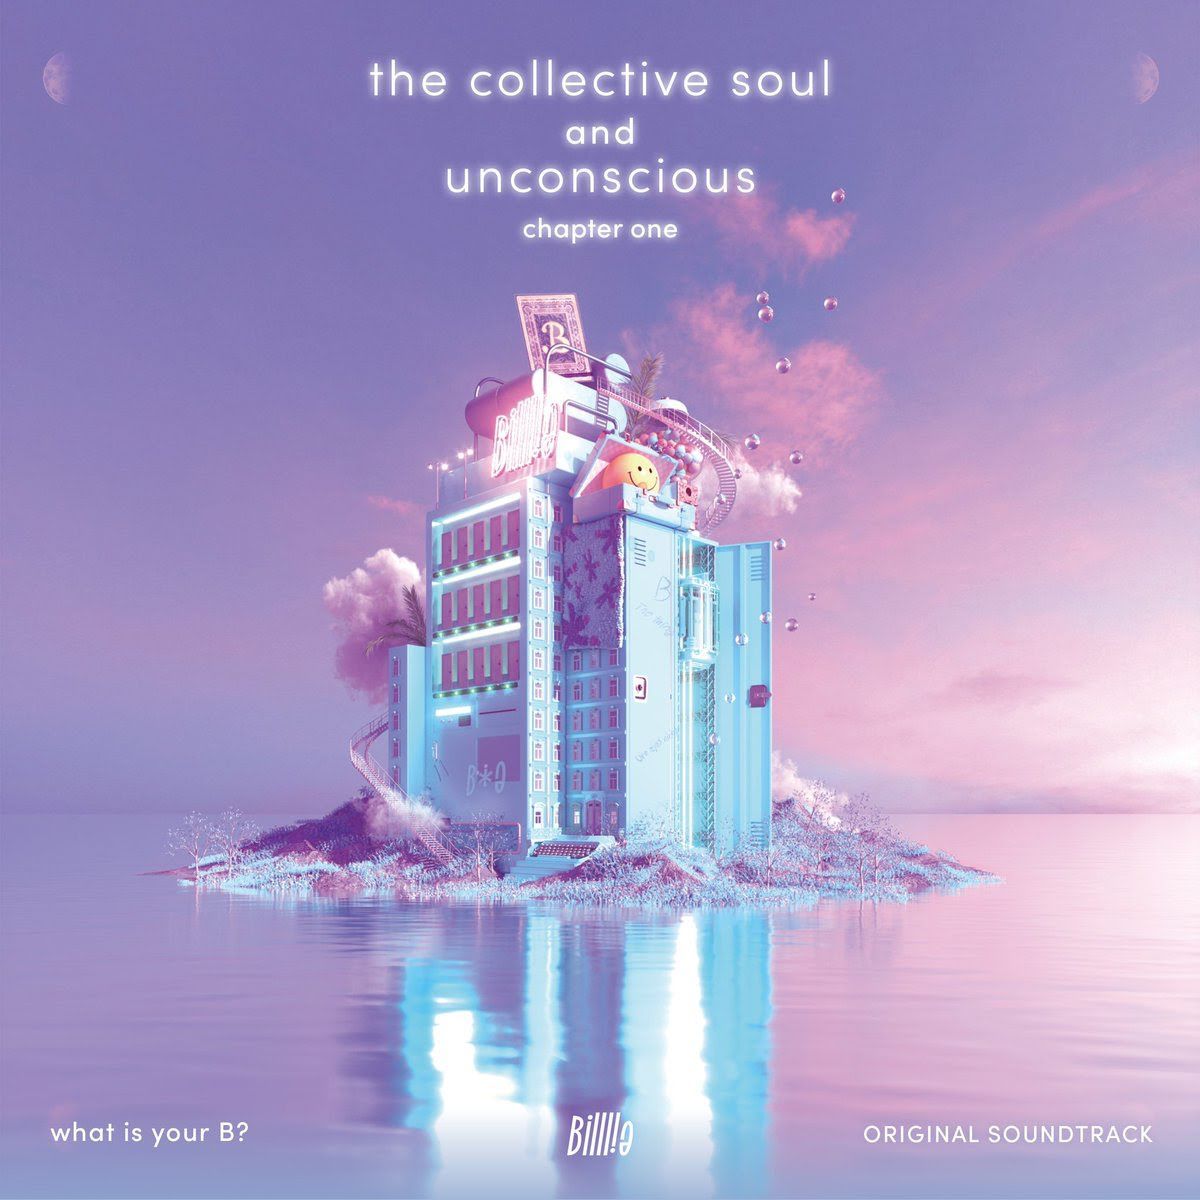 The Collective Soul and Unconsciousness: Chapter One by Billlie